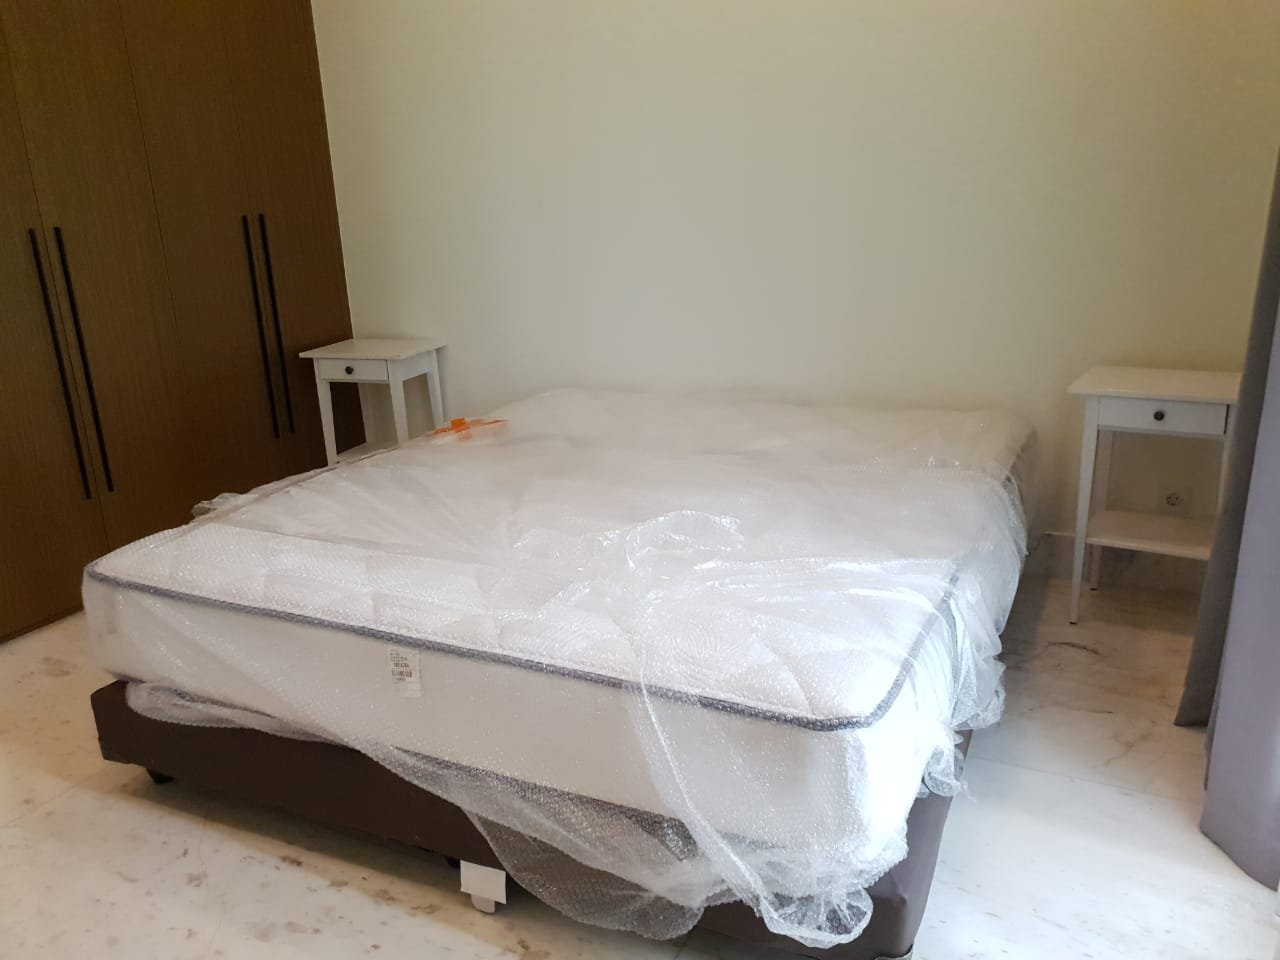 The Best Apartment to Live in Jakarta, Very Cozy and Awesome Gym and Other Facilities, 2 Bedrooms Size 157sqm, Fully Furnished, Just Renovated in Botanica